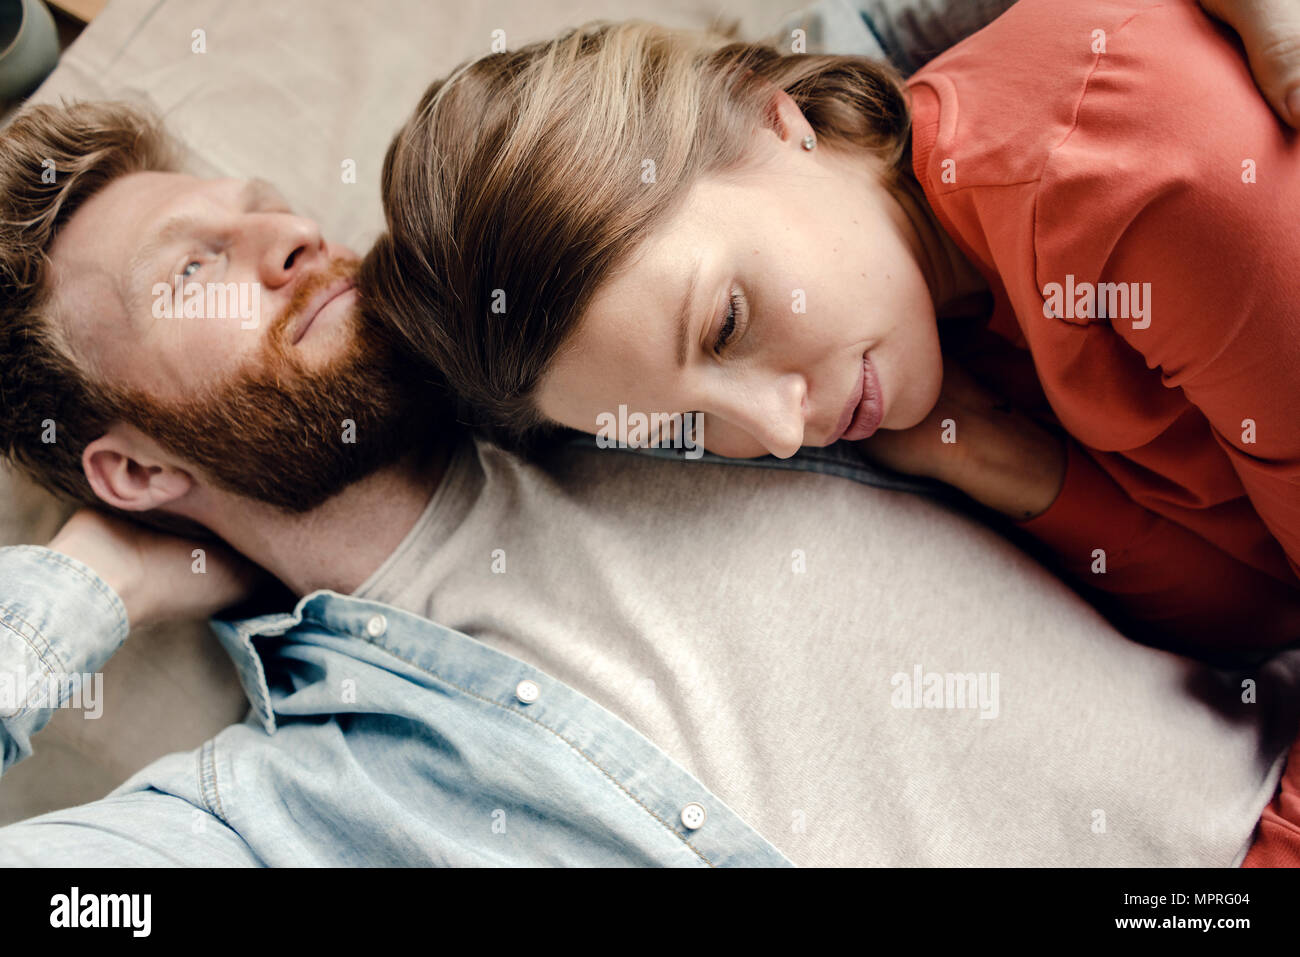 Affectionate couple cuddling at home Stock Photo